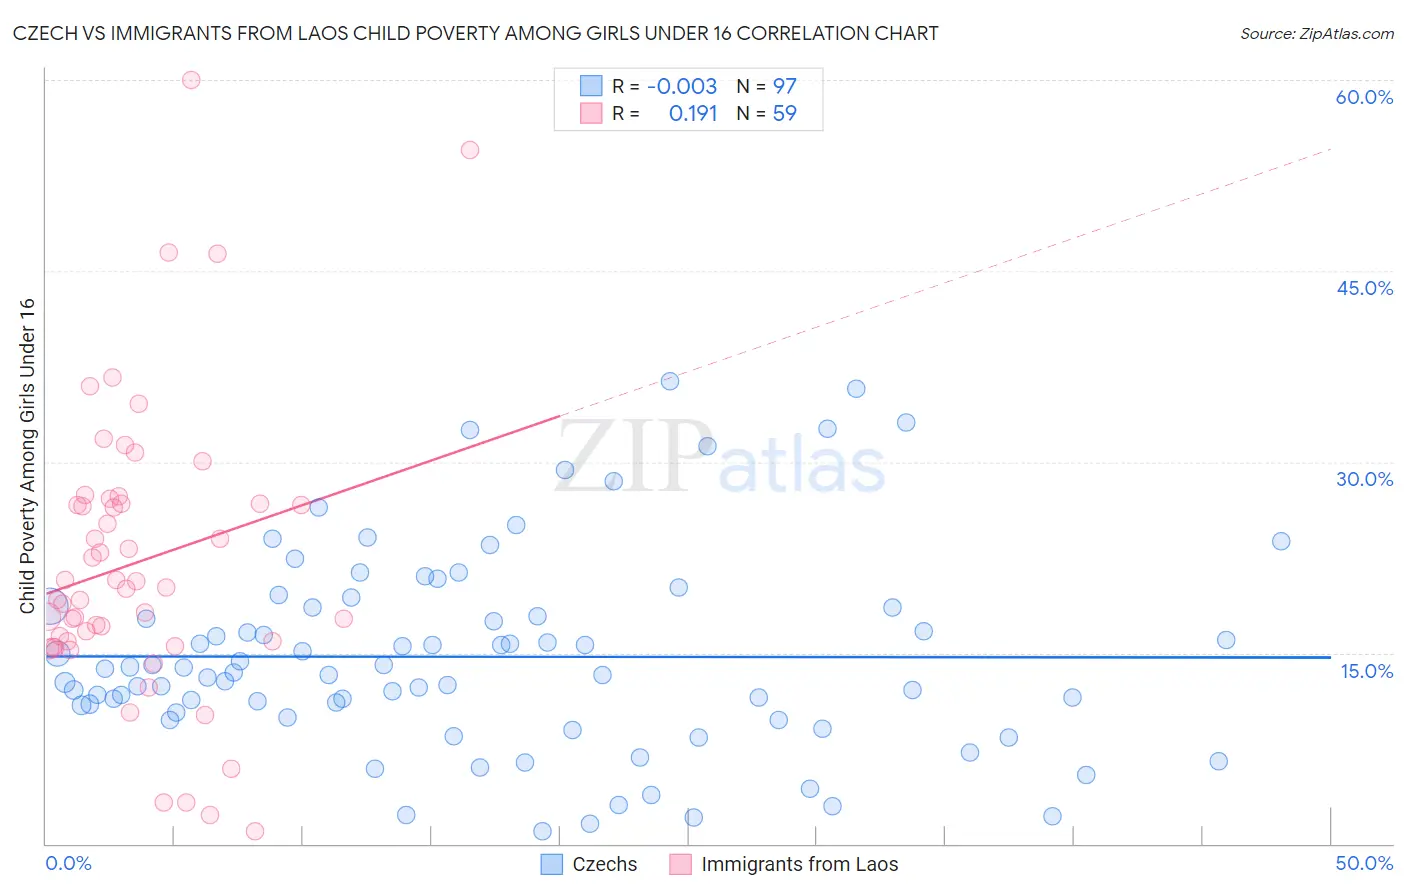 Czech vs Immigrants from Laos Child Poverty Among Girls Under 16